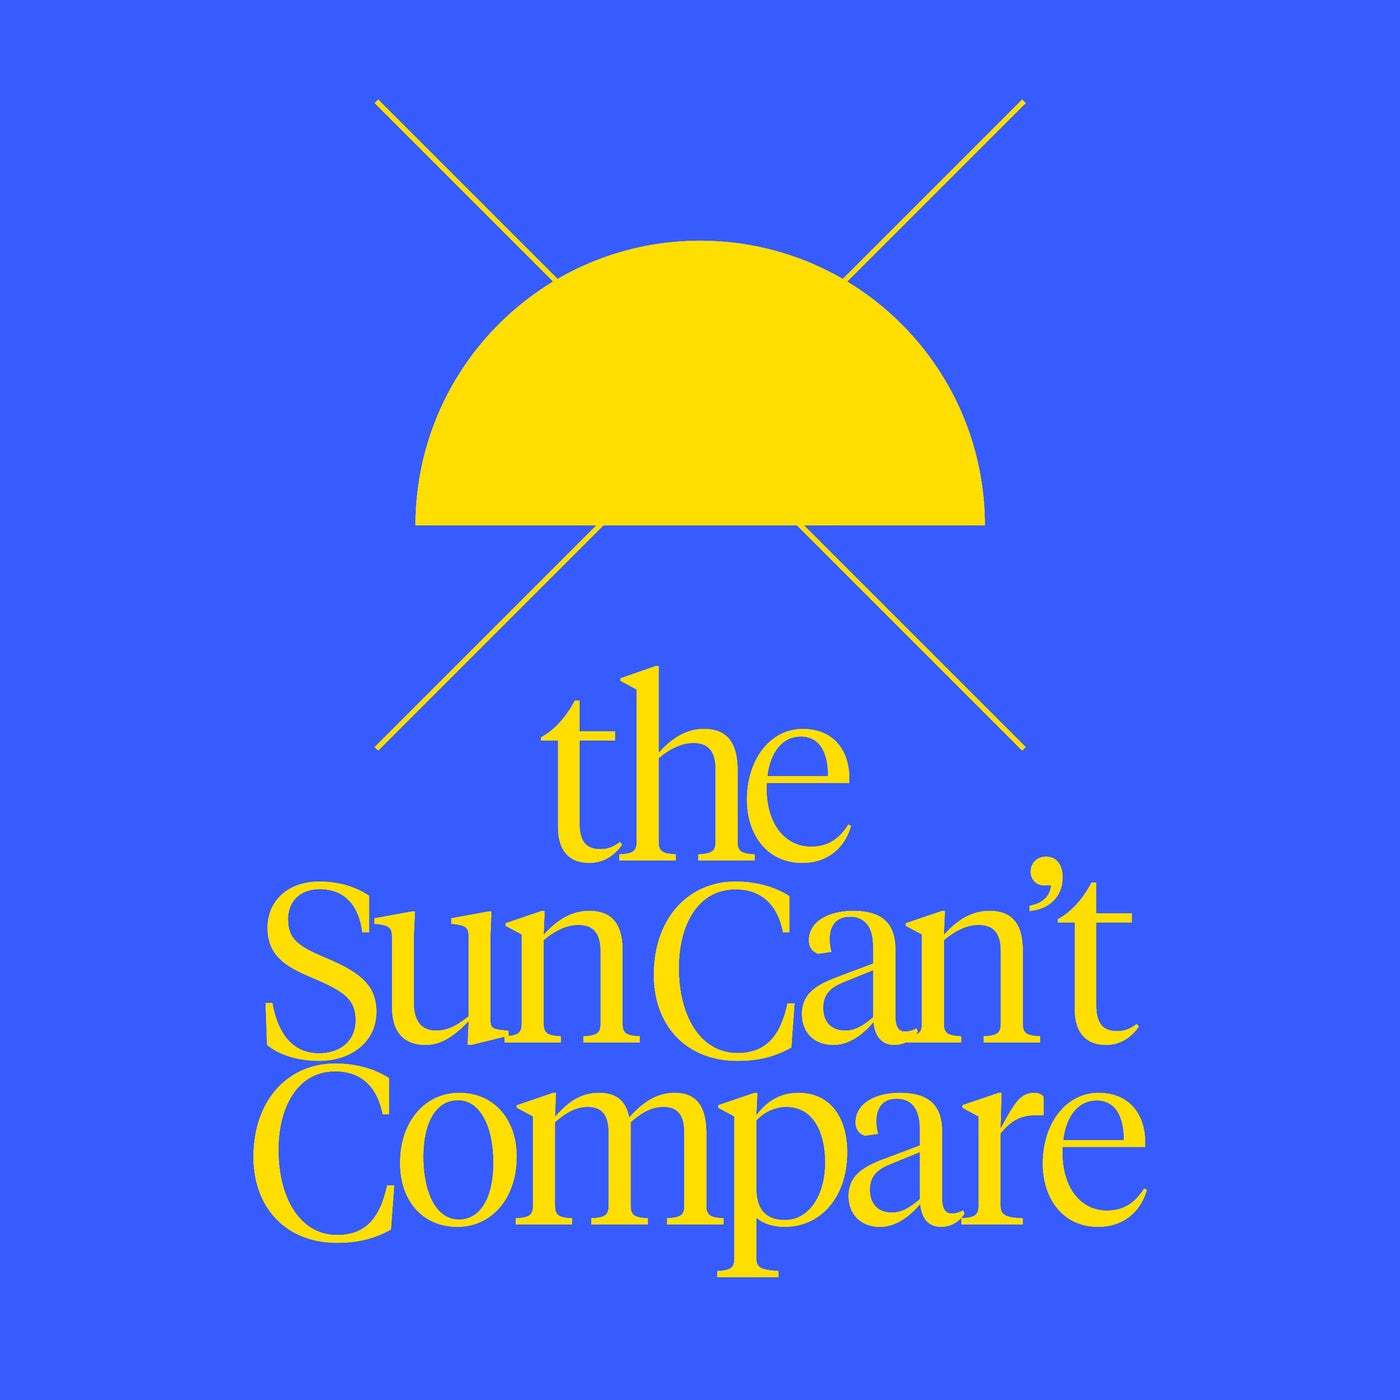 Download Space Motion, Kashovski - The Sun Can't Compare on Electrobuzz